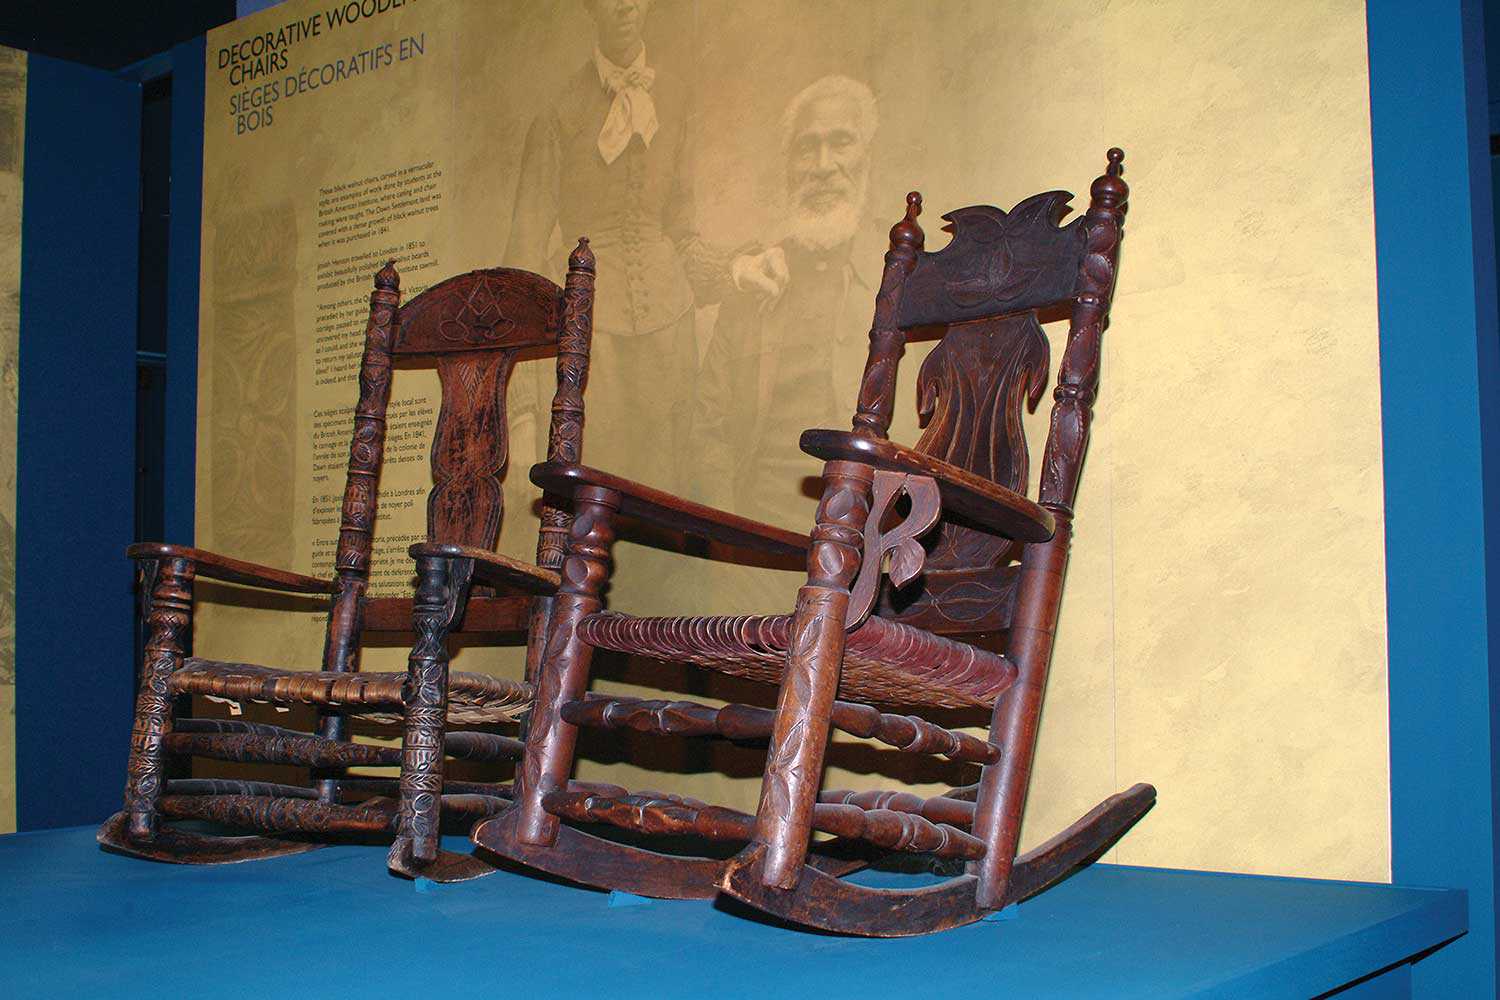 Created by British American Institute students in the 19th century, these remarkable chairs are on display at Uncle Tom’s Cabin Historic Site in Dresden. Visit www.uncletomscabin.org for more information.